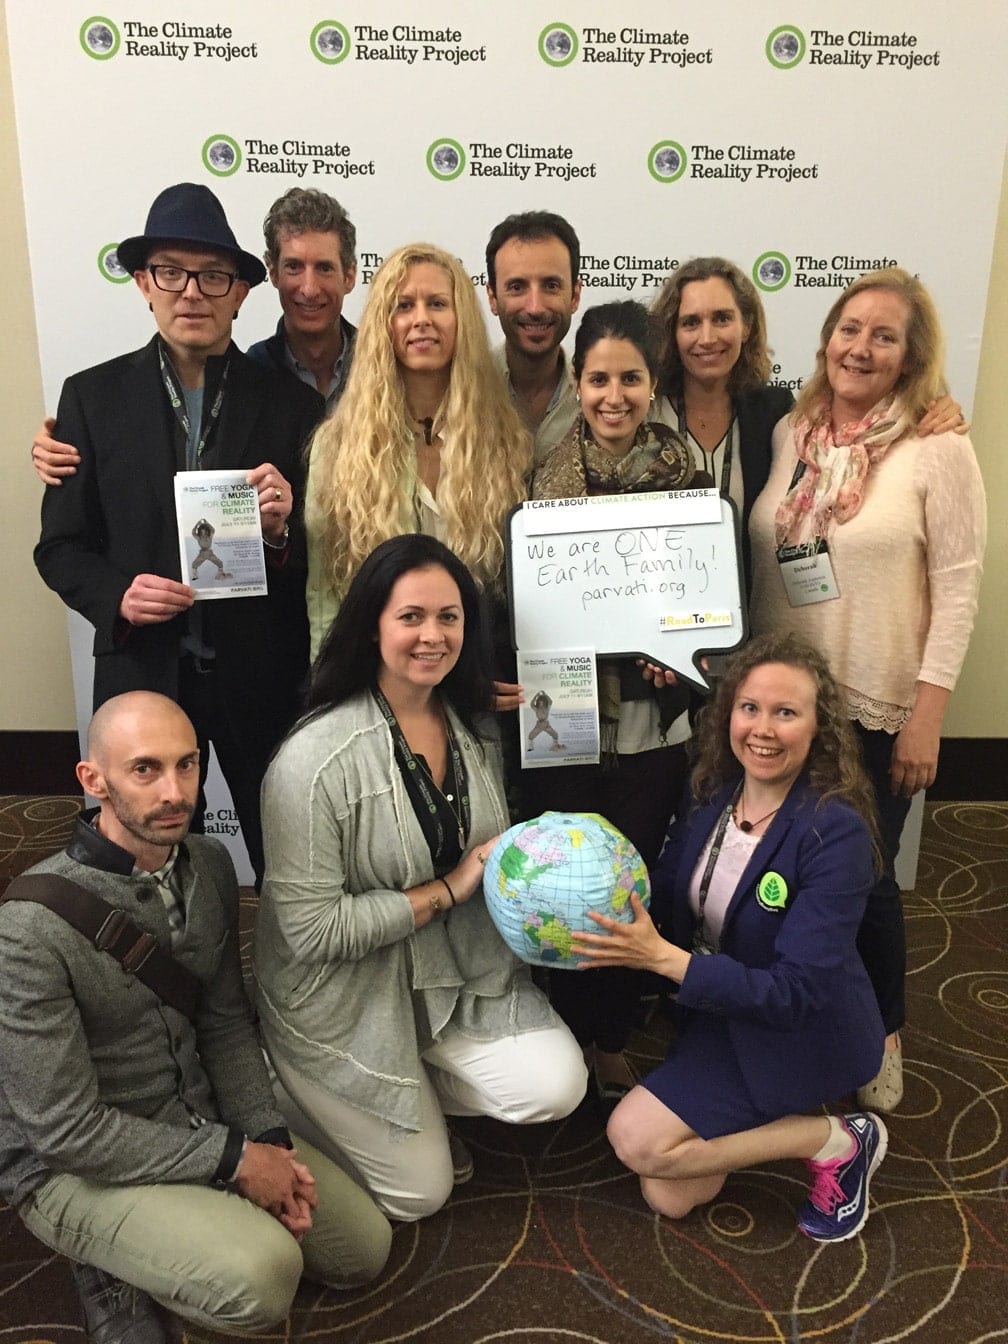 Parvati.org members at Climate Reality Leadership Training in Toronto